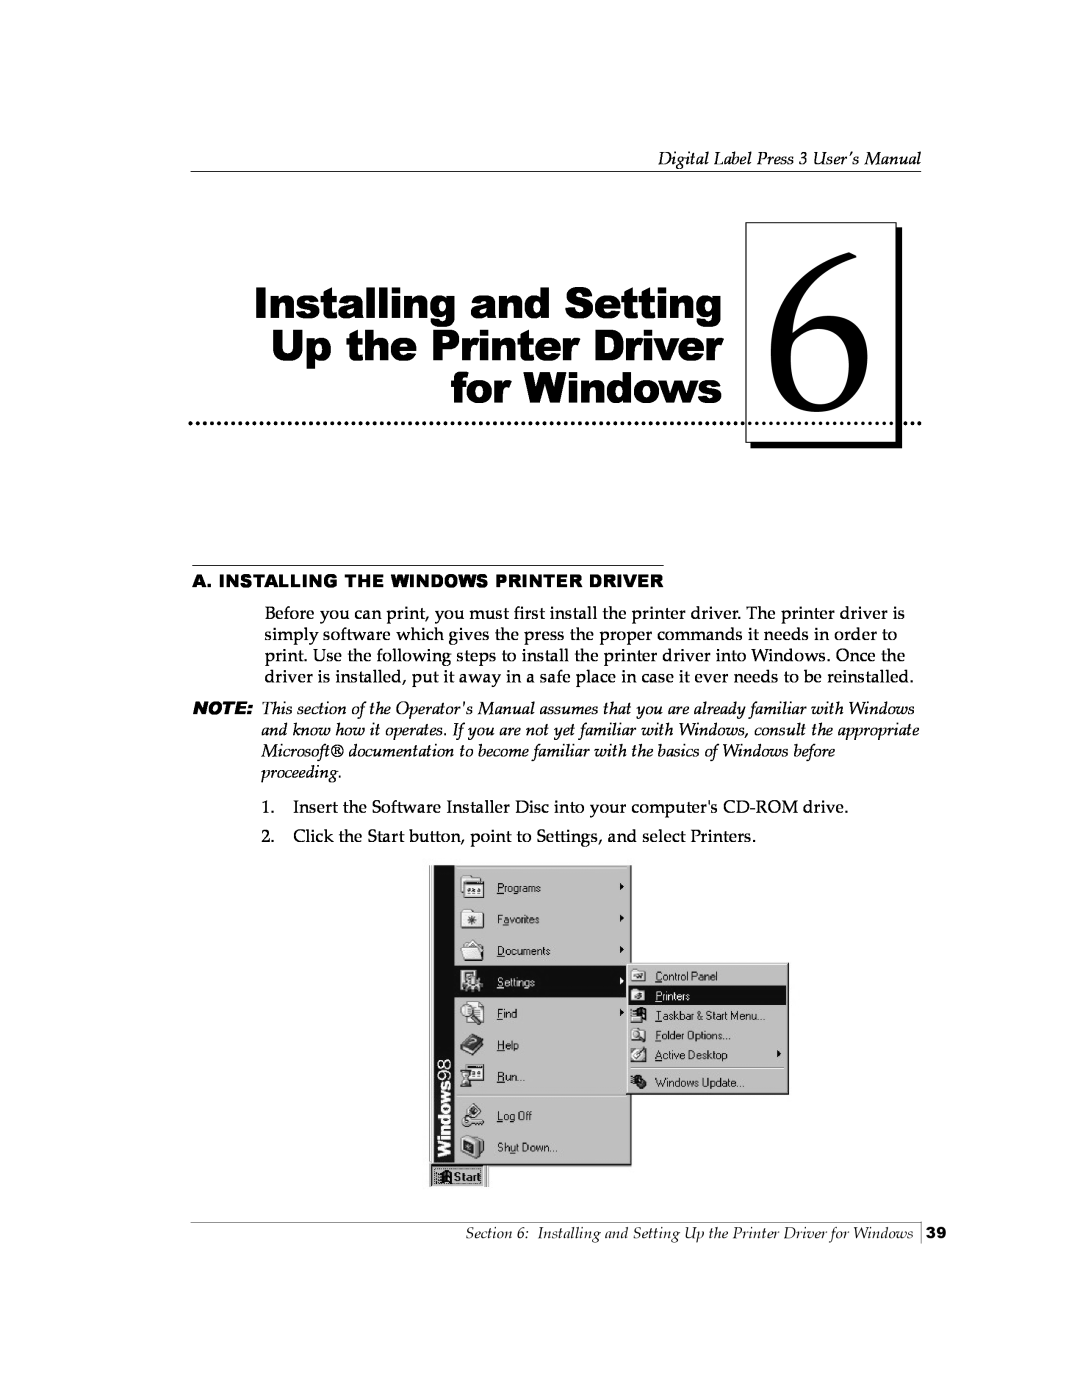 Primera Technology 510212 Installing and Setting Up the Printer Driver for Windows, Digital Label Press 3 User’s Manual 